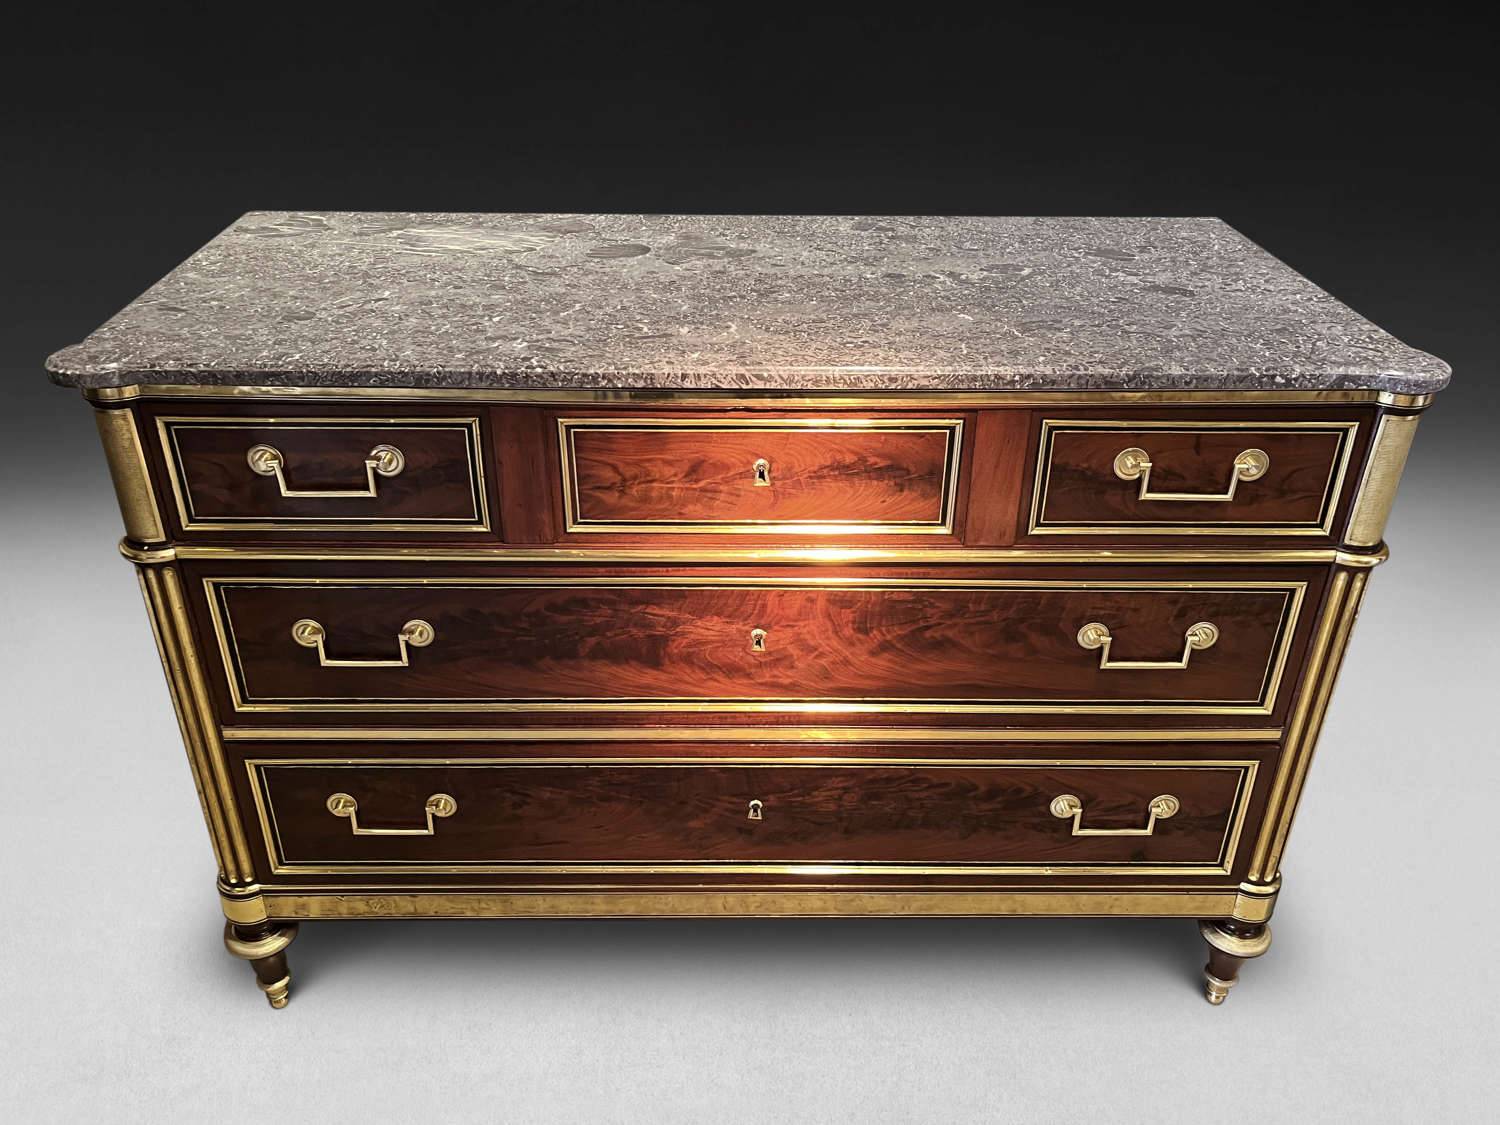 A LOUIS XVI PERIOD BRASS MOUNTED COMMODE